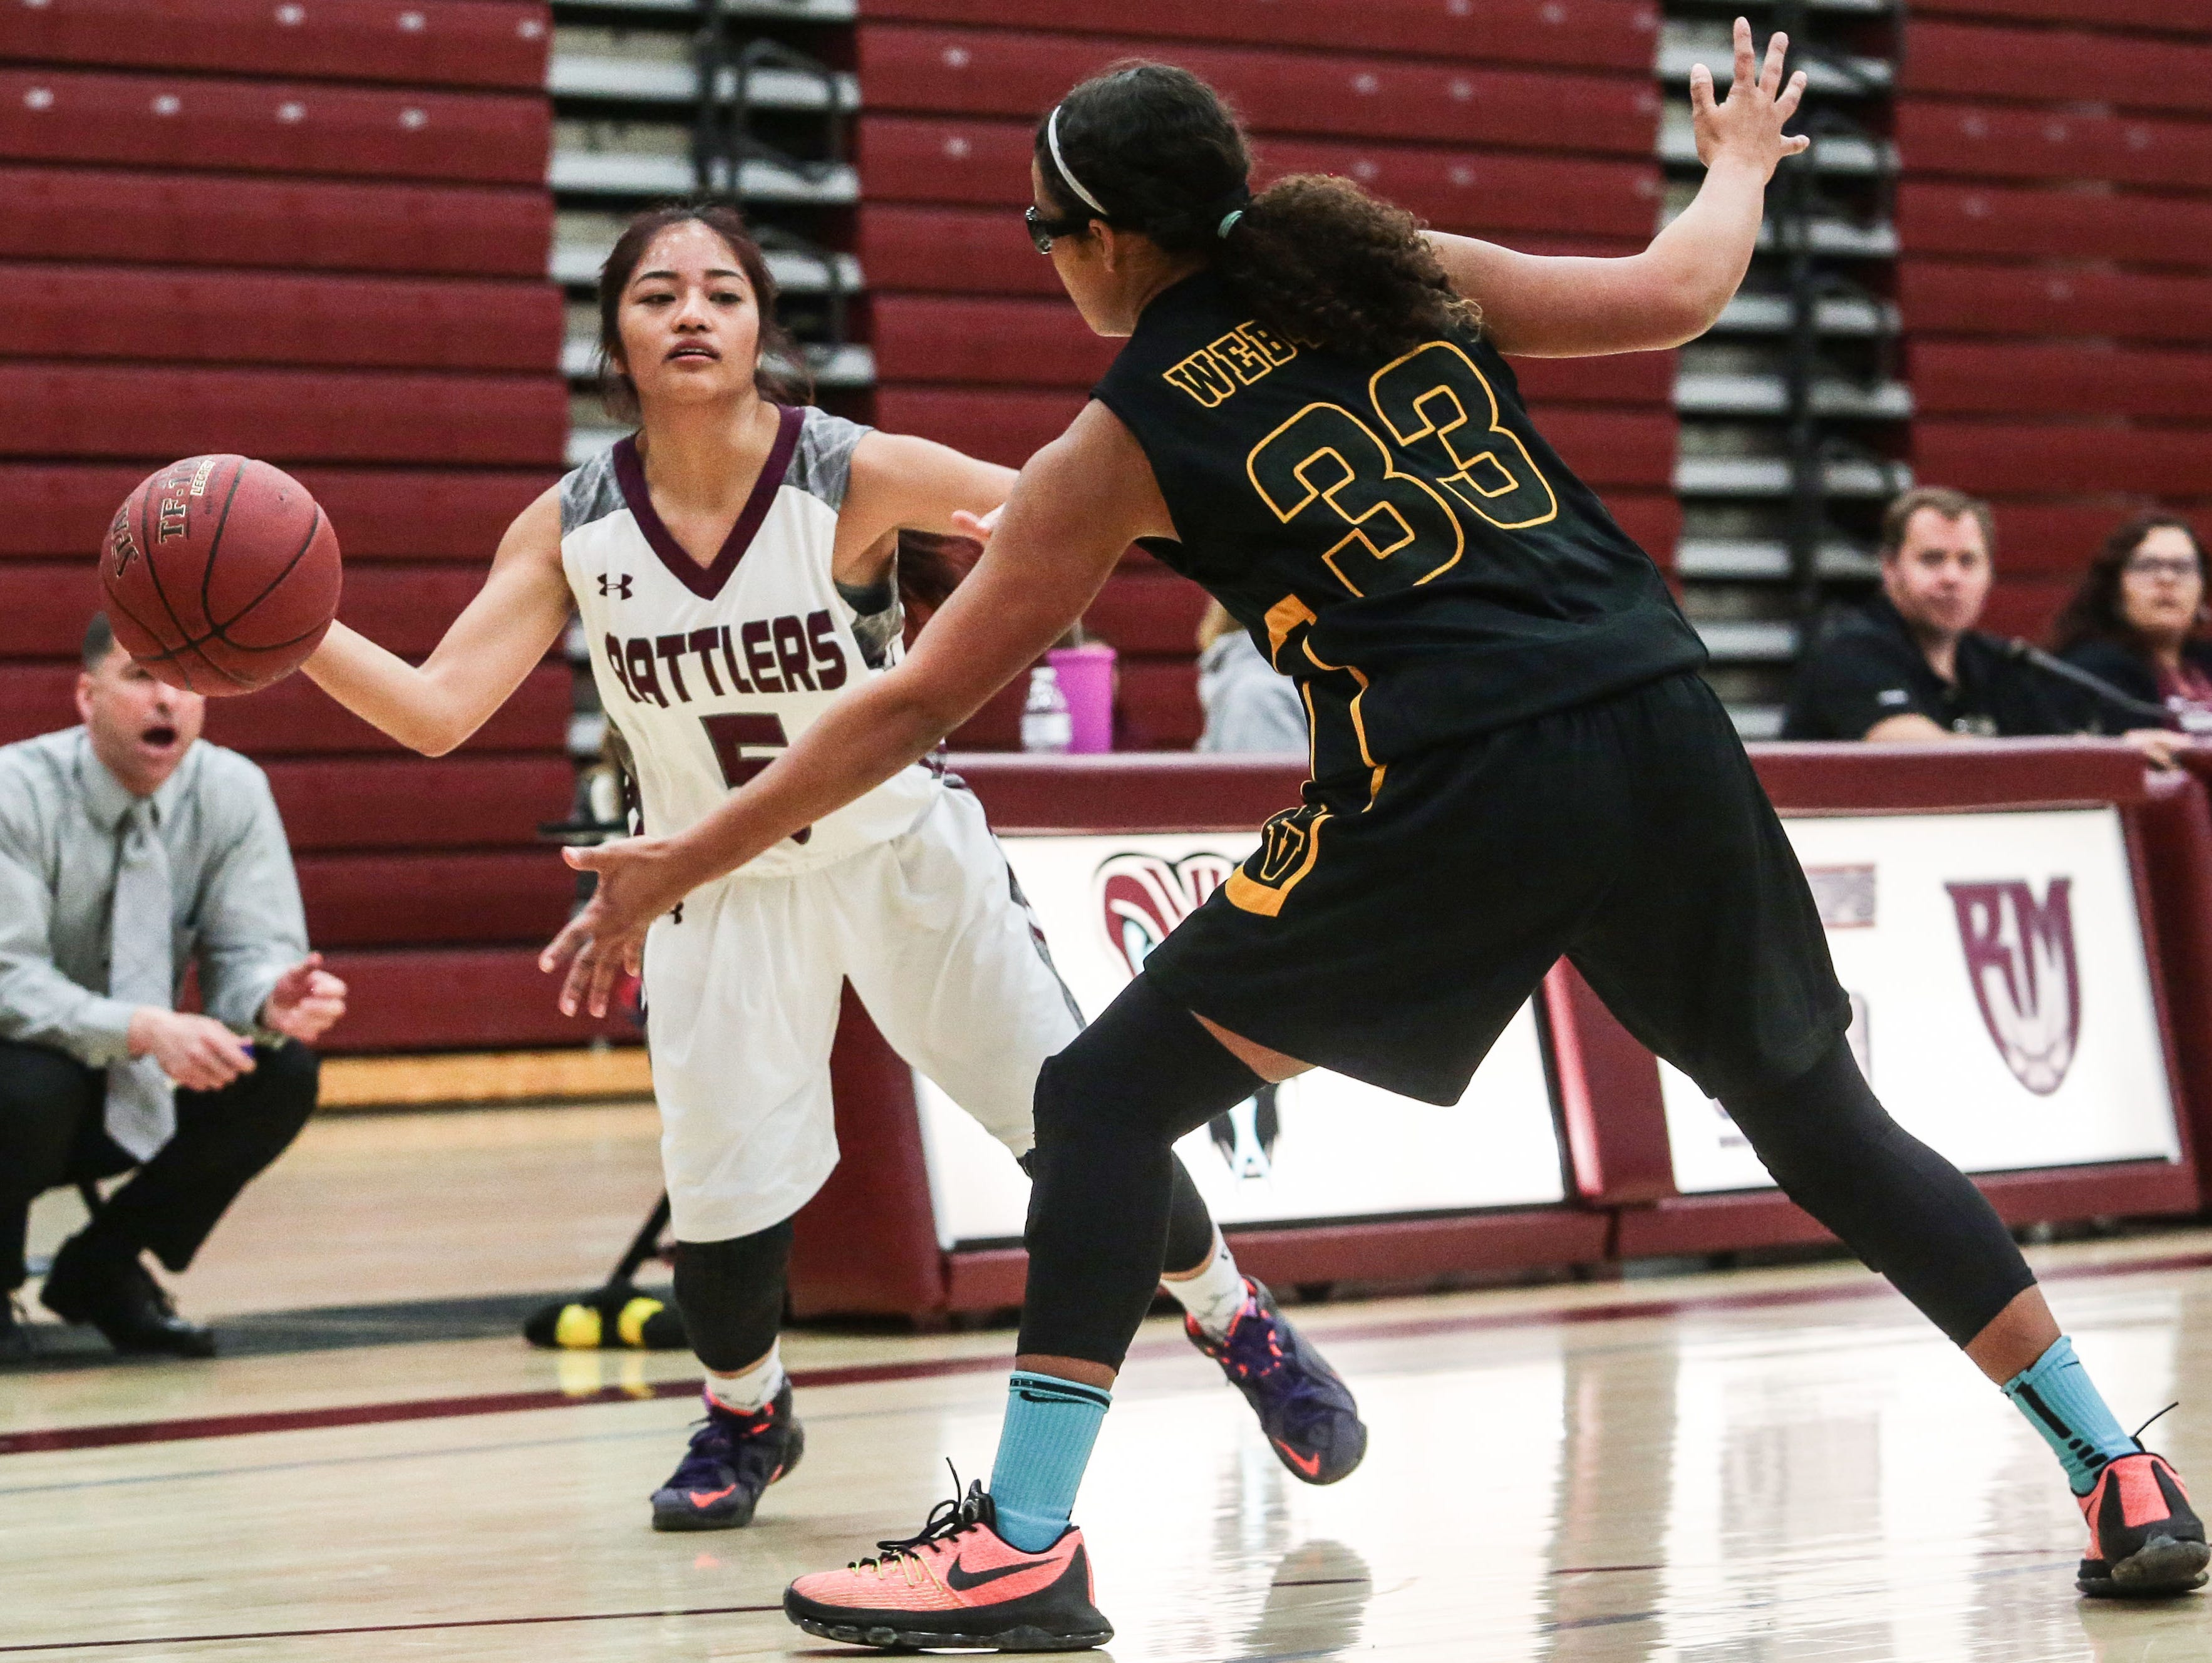 Rancho Mirage's Jodi-anne Ingal passes the ball against Yucca Valley on Thursday, February 2, 2017 in Rancho Mirage.